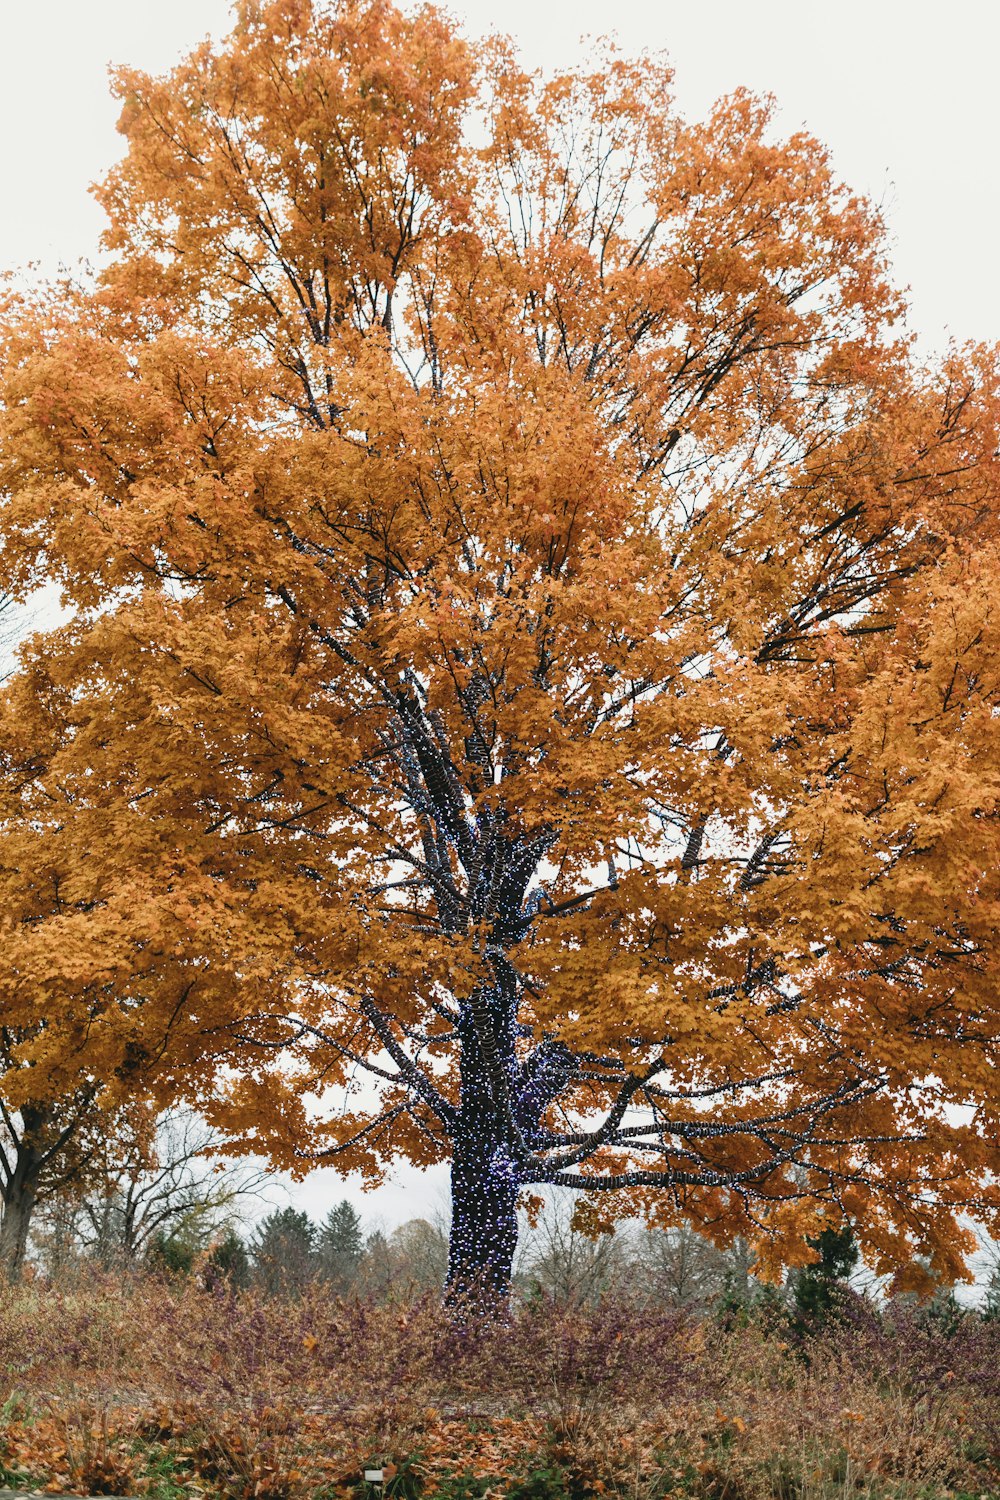 a large tree with yellow leaves in a field